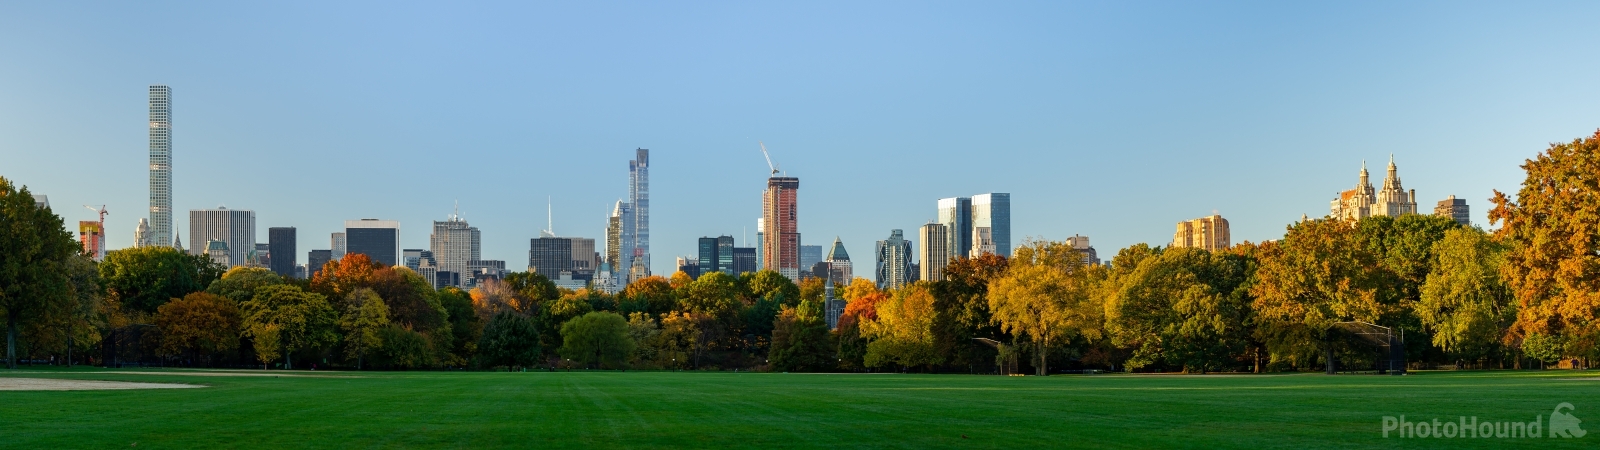 Image of North Meadow Central Park view of Manhattan by VOJTa Herout